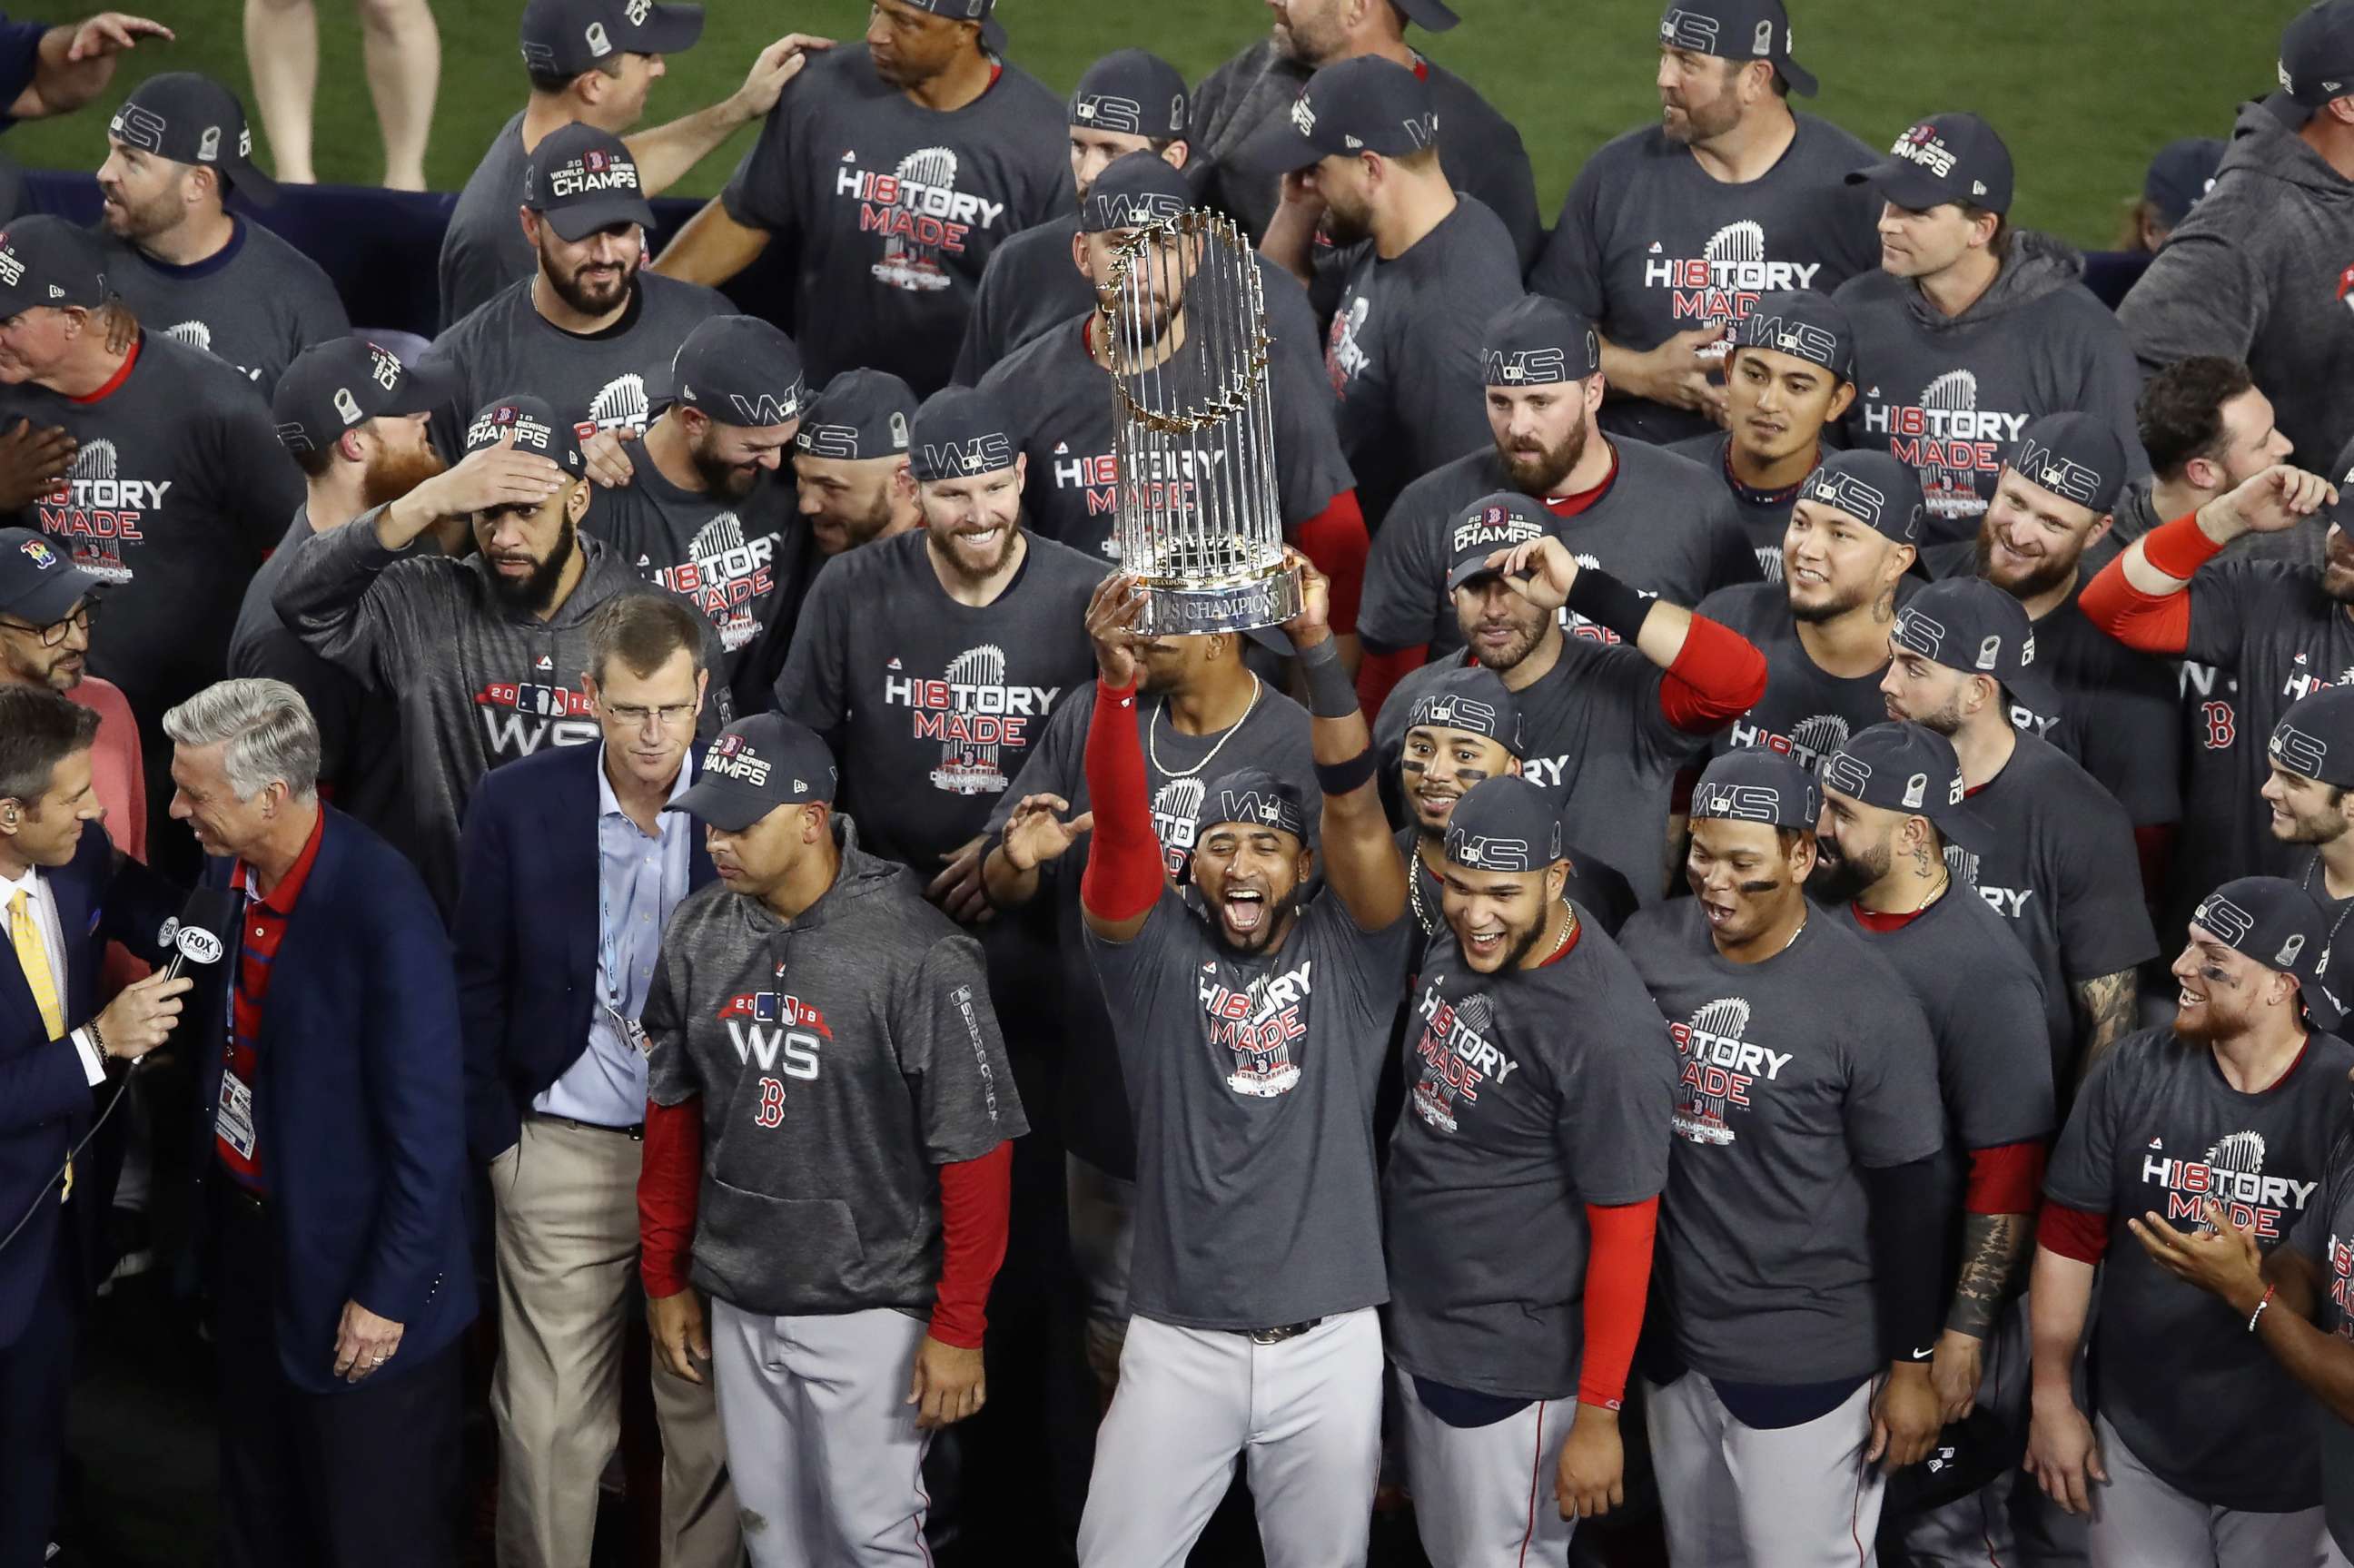 It's official: Dodgers cheated out of 2017 World Series title